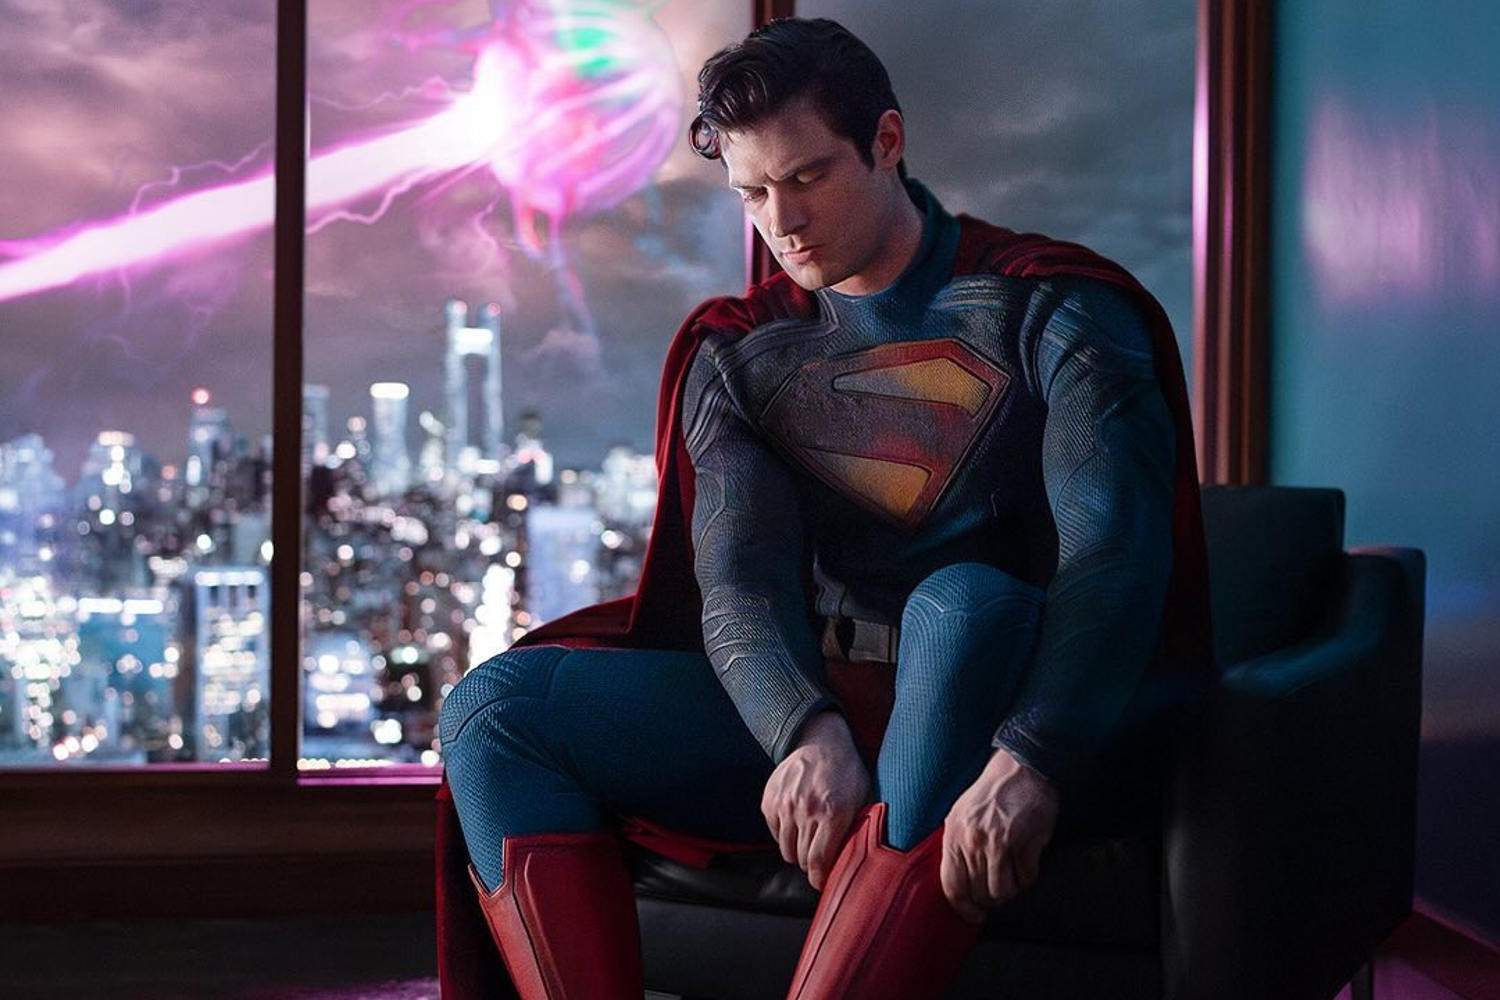 new superman fully revealed in photo from director james gunn for upcoming movie